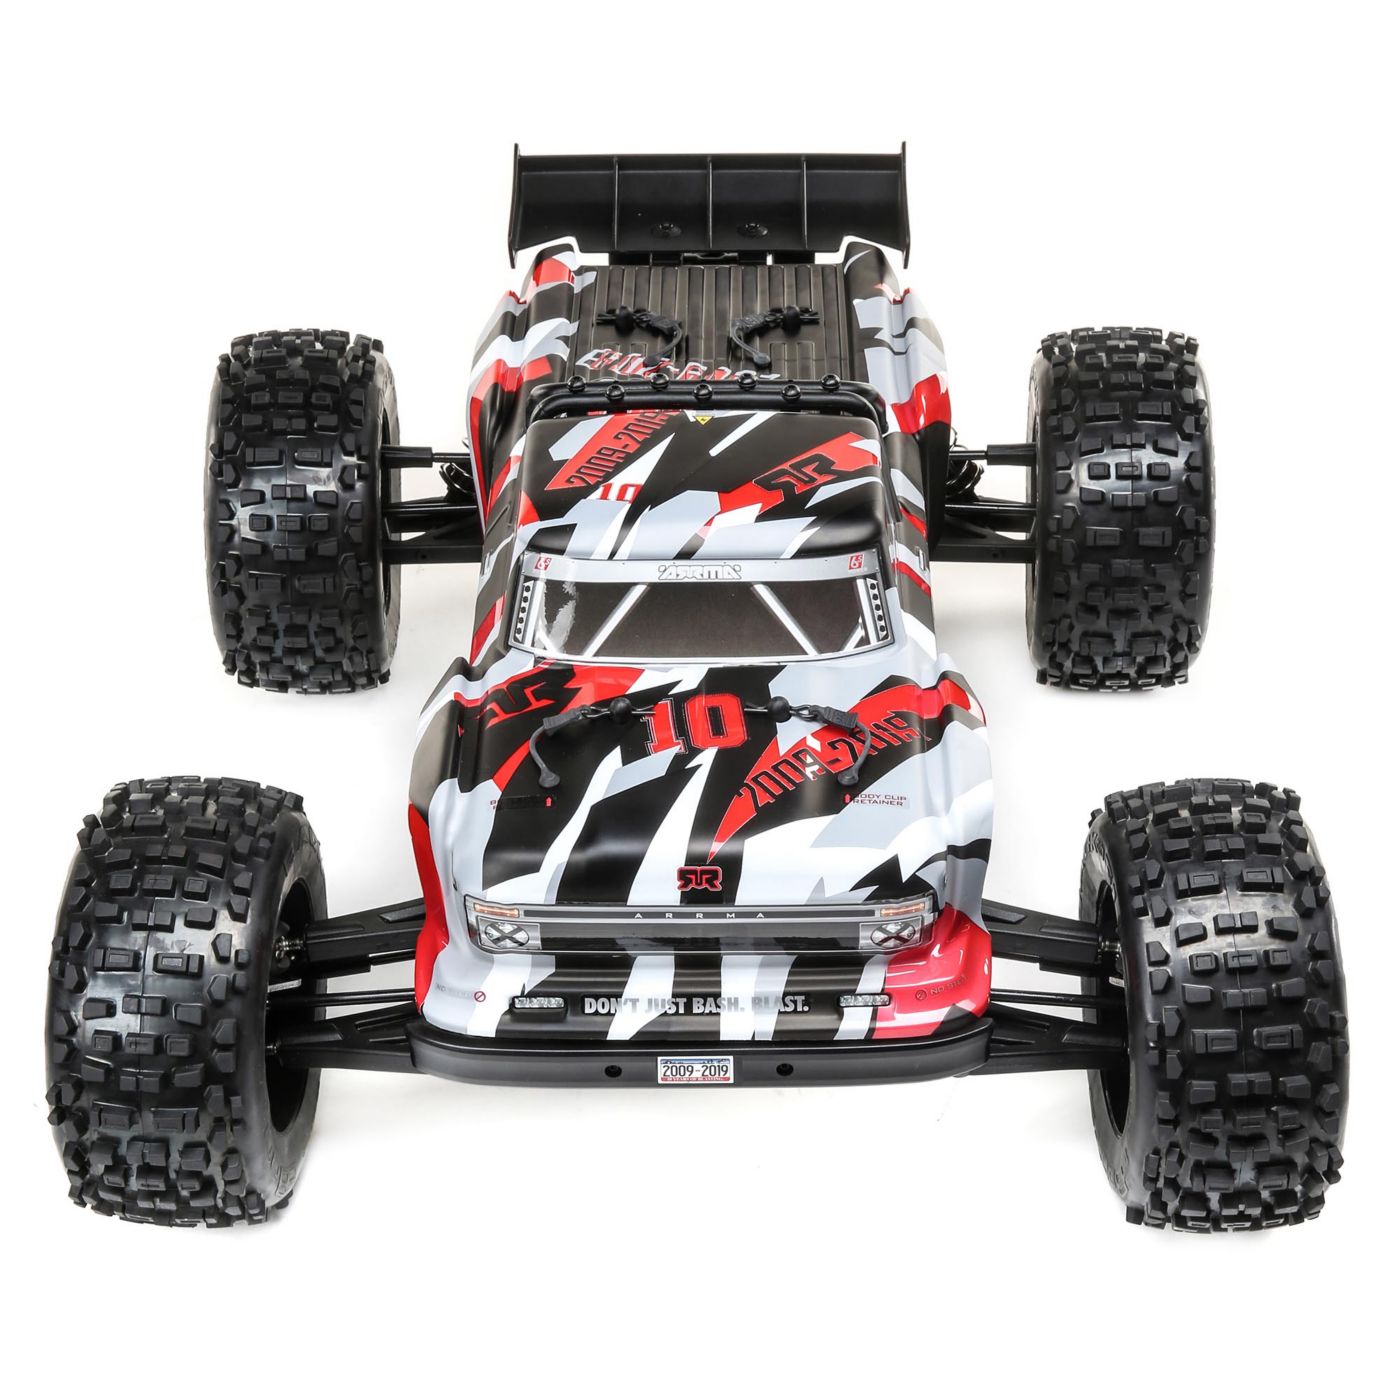 ARRMA Outcast 6S 10th Anniversary Edition - Front